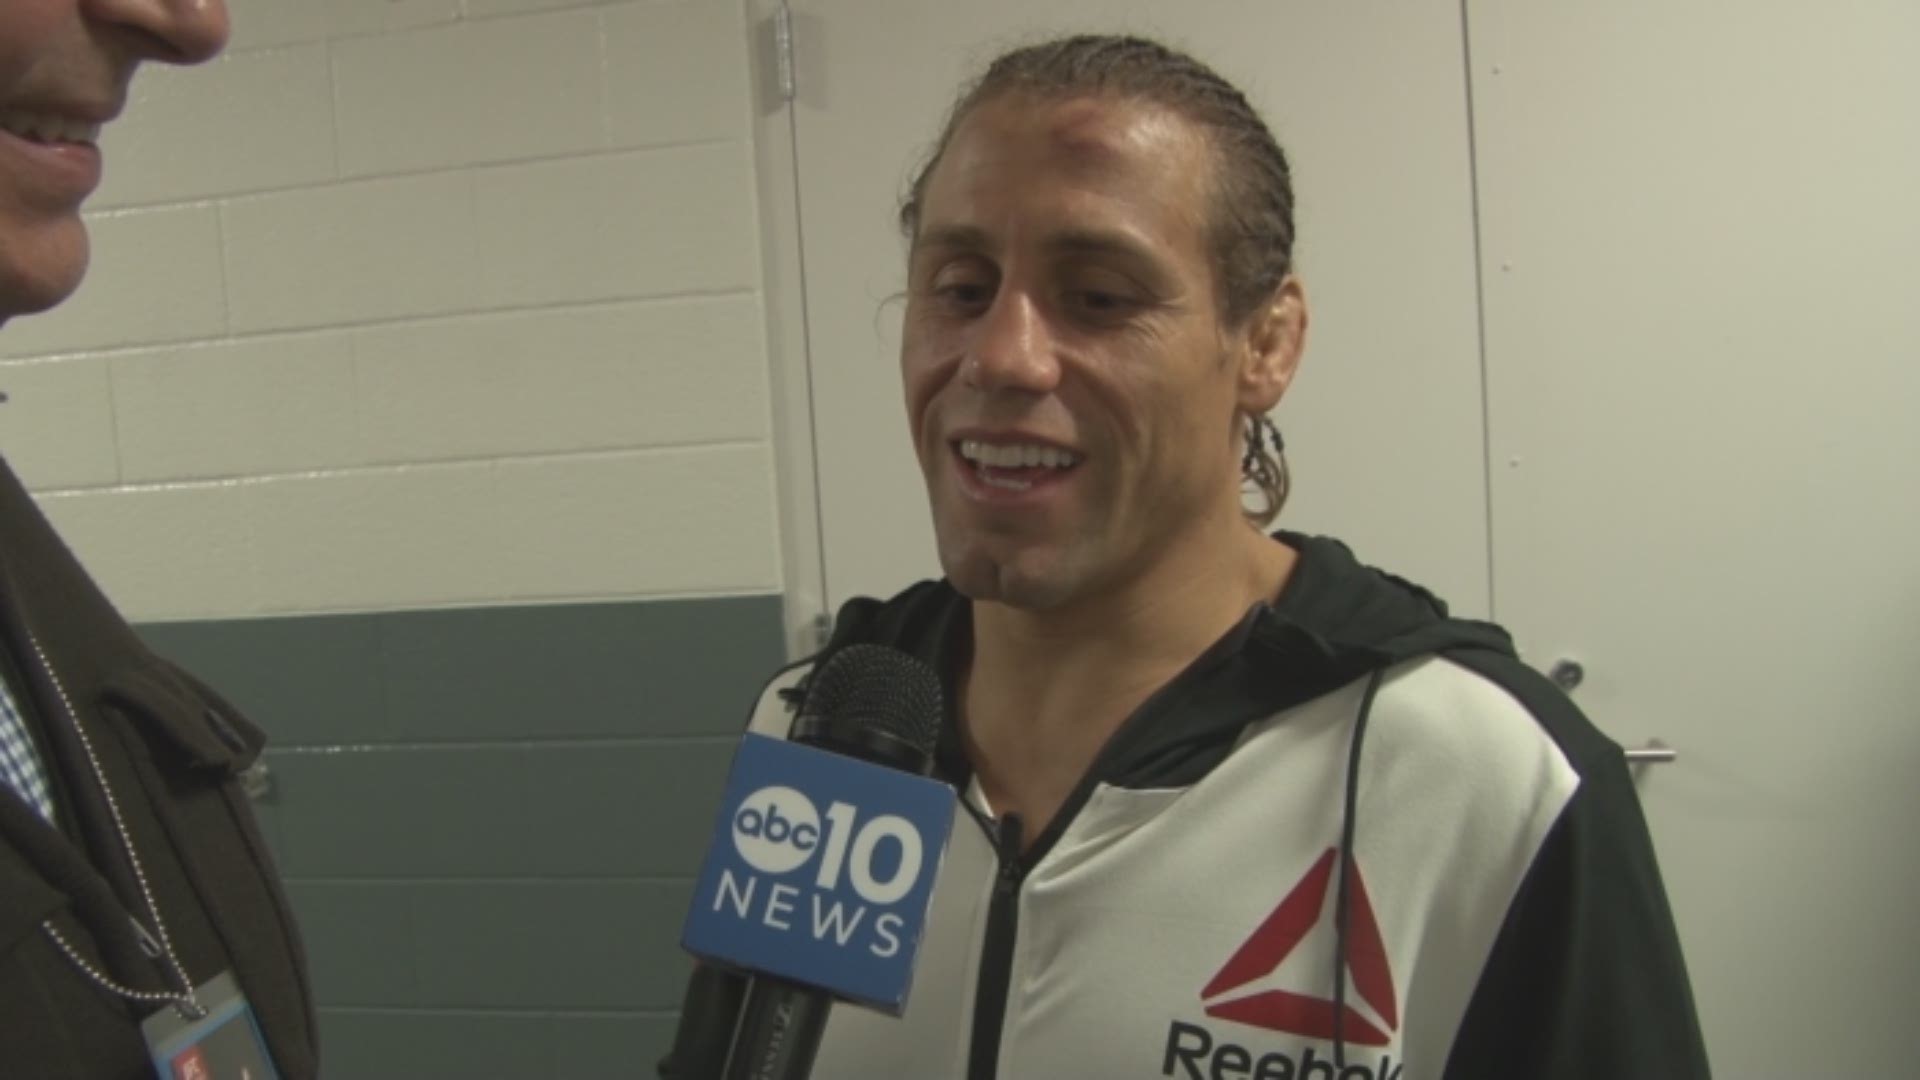 ABC10's Bryan May speaks with Sacramento native Urijah Faber, who discusses his unanimous decision victory over Brad Pickett in his final UFC fight and doing-so in his hometown at the Golden 1 Center on Saturday night.